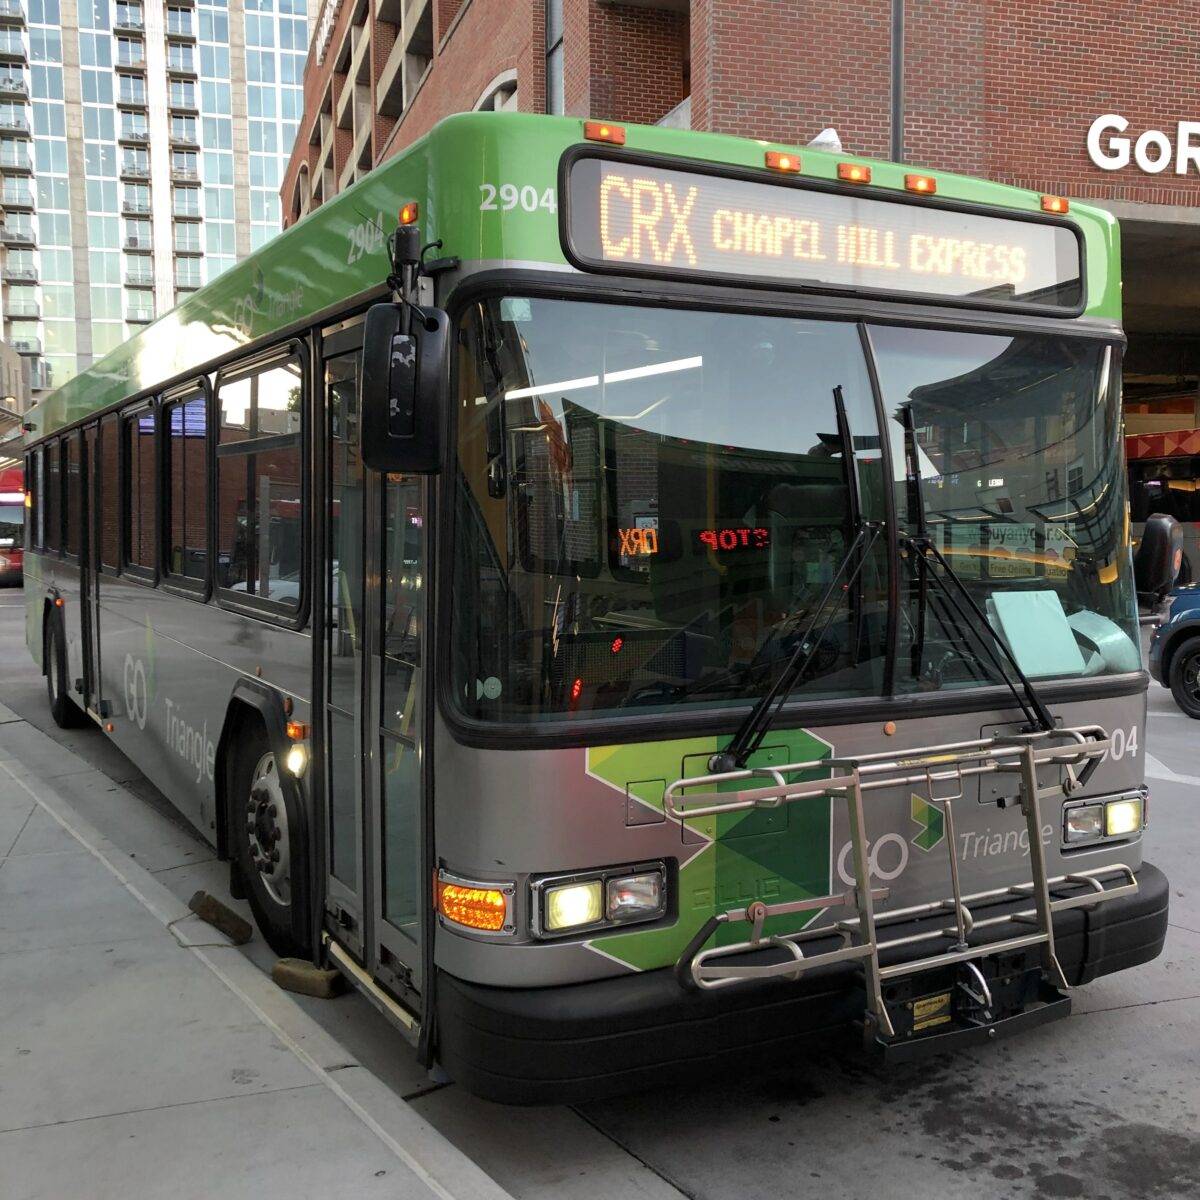 Photograph of the front of a GoTriangle bus with the destination sign reading "CRX Chapel Hill Express"